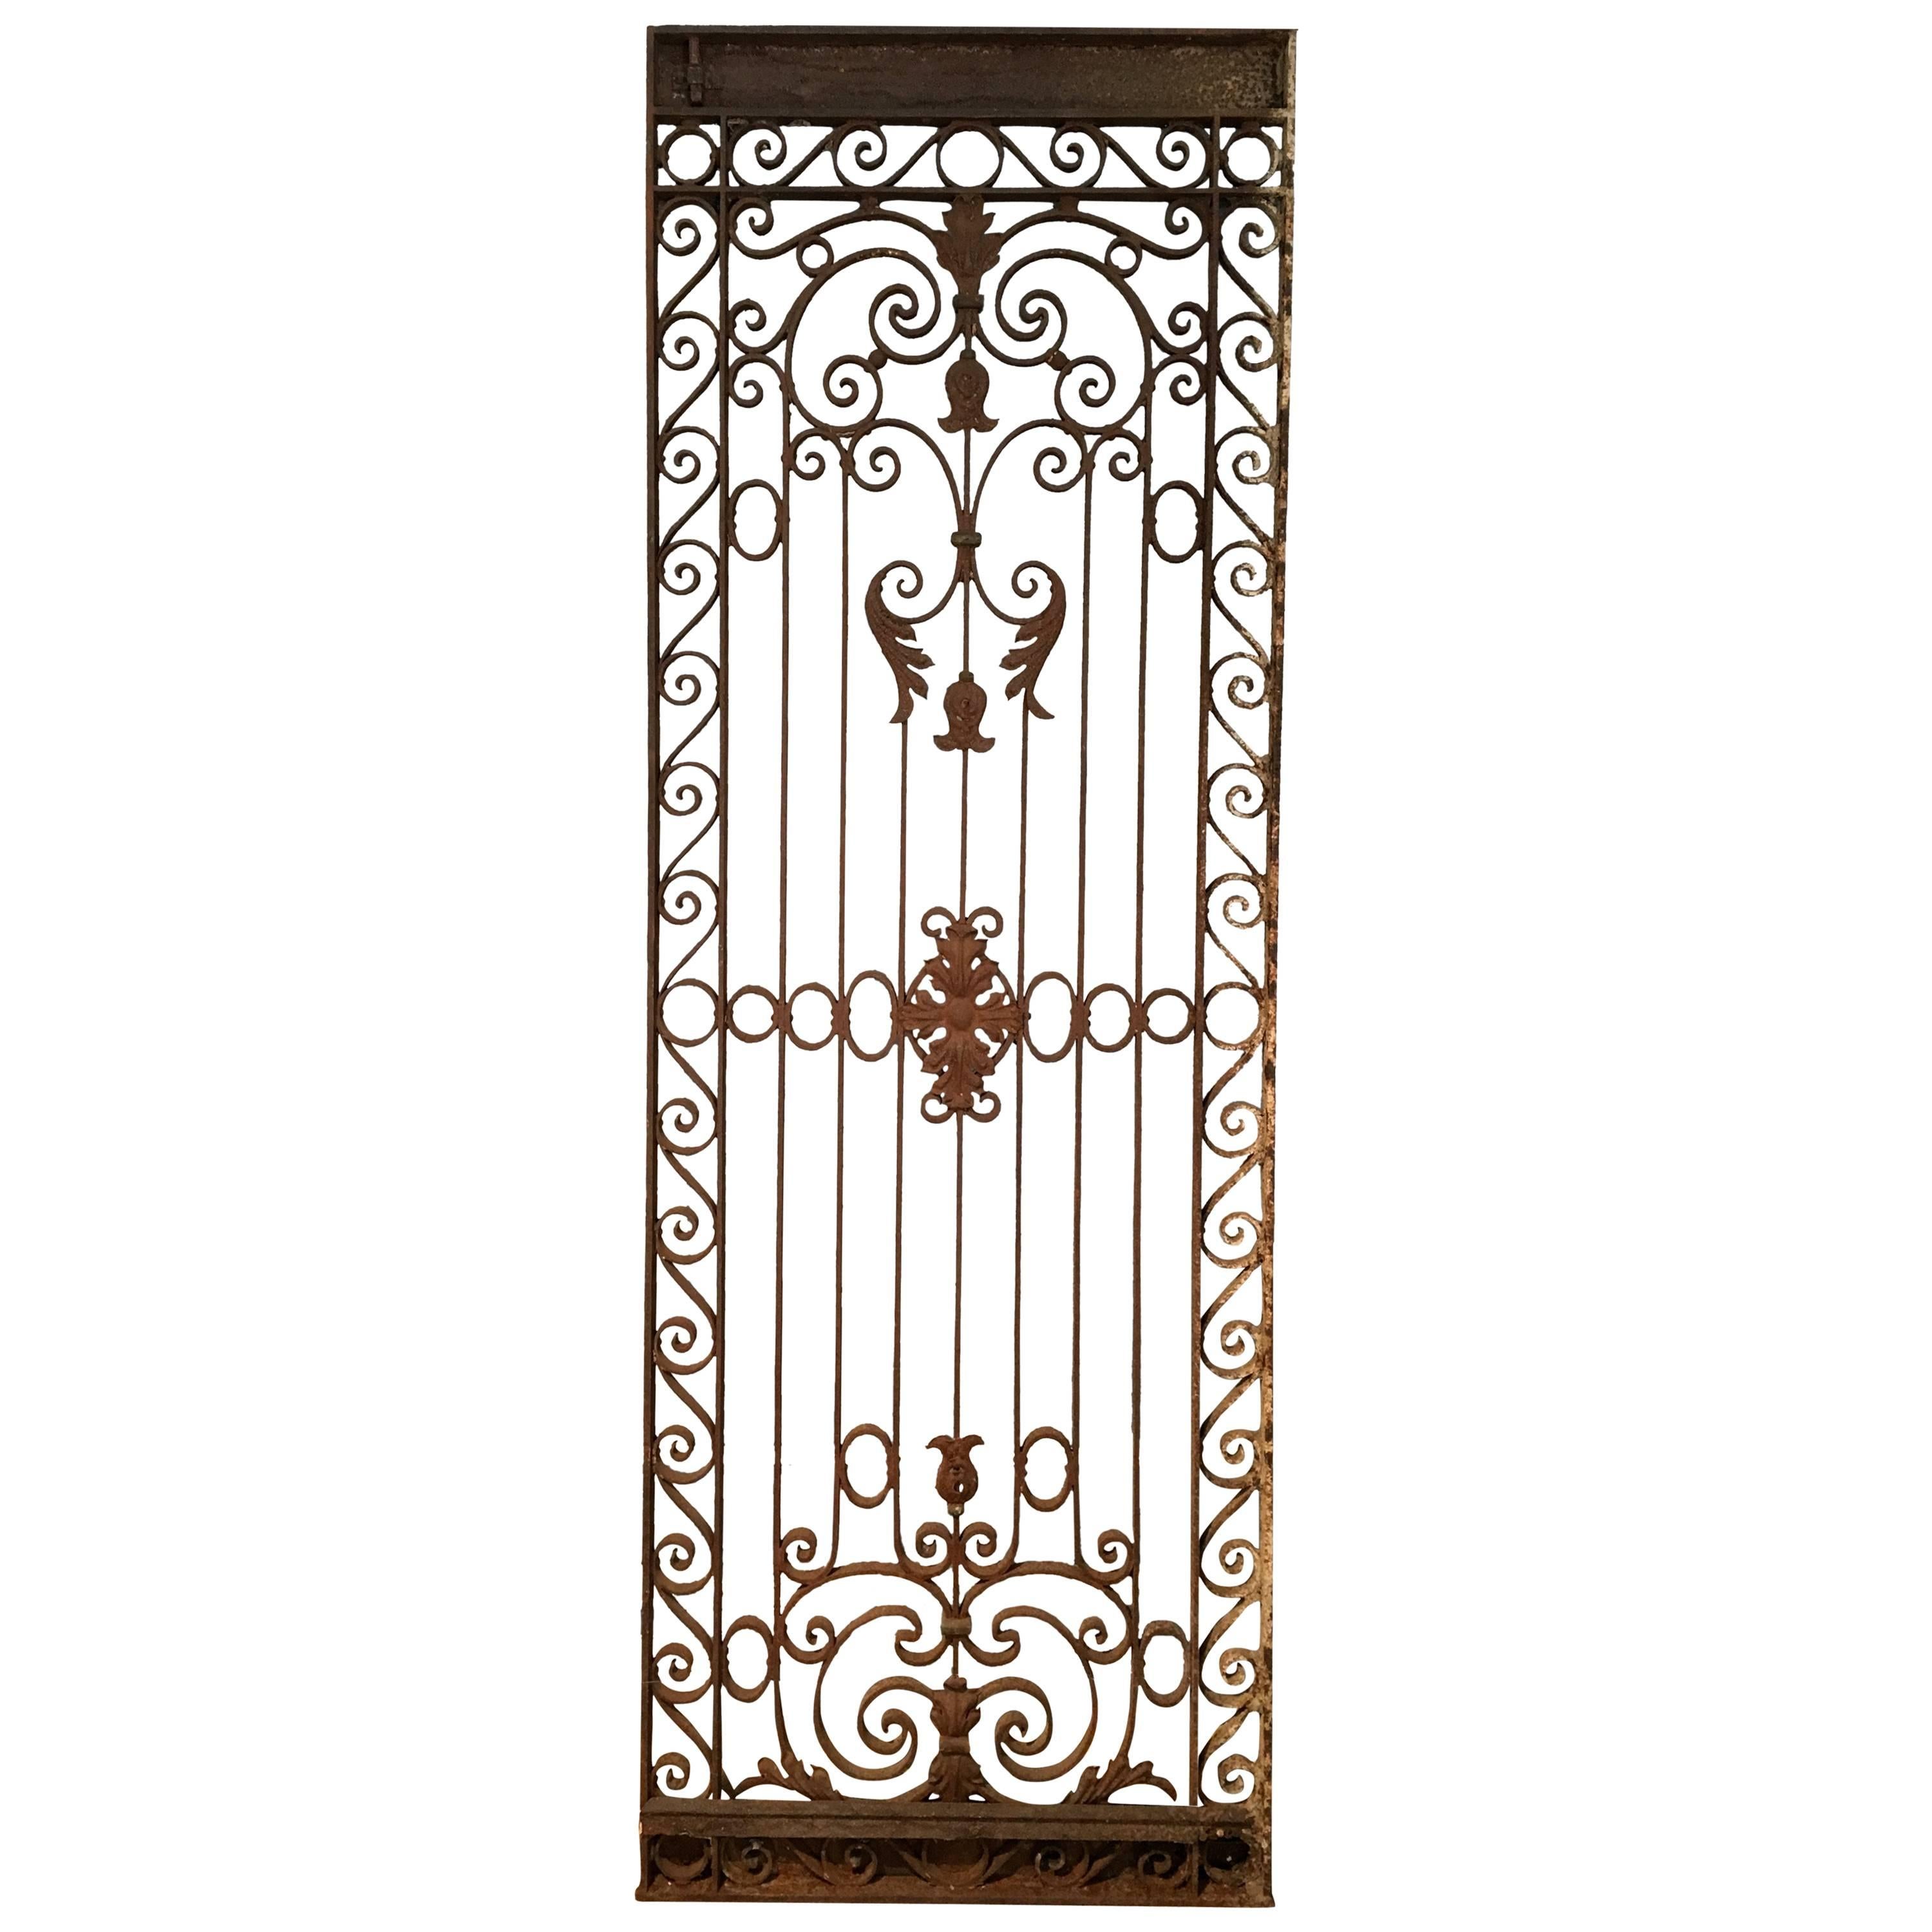 Very Tall 19th Century French Wrought Iron Gate